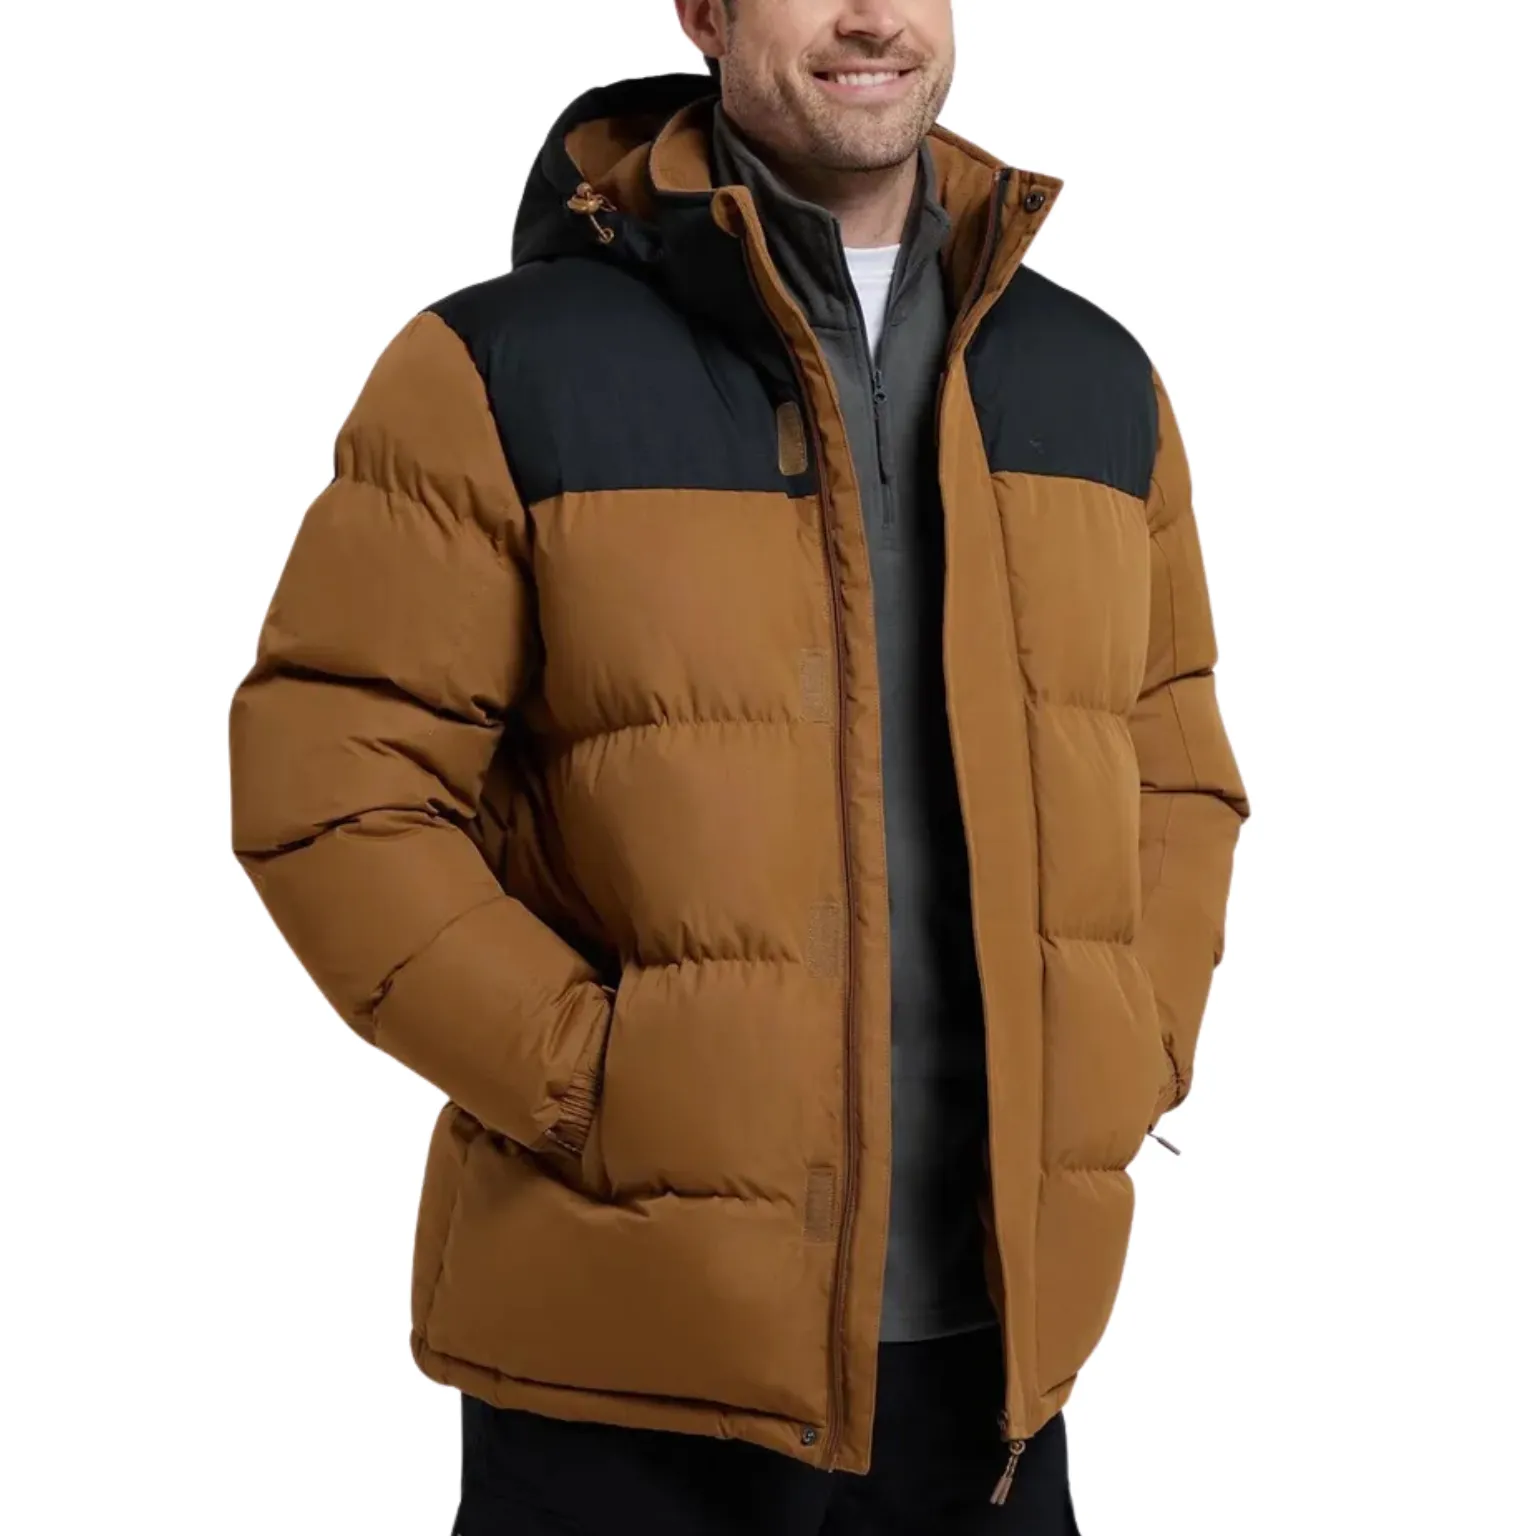 Padded Jacket Manufacturing with sustainable solutions